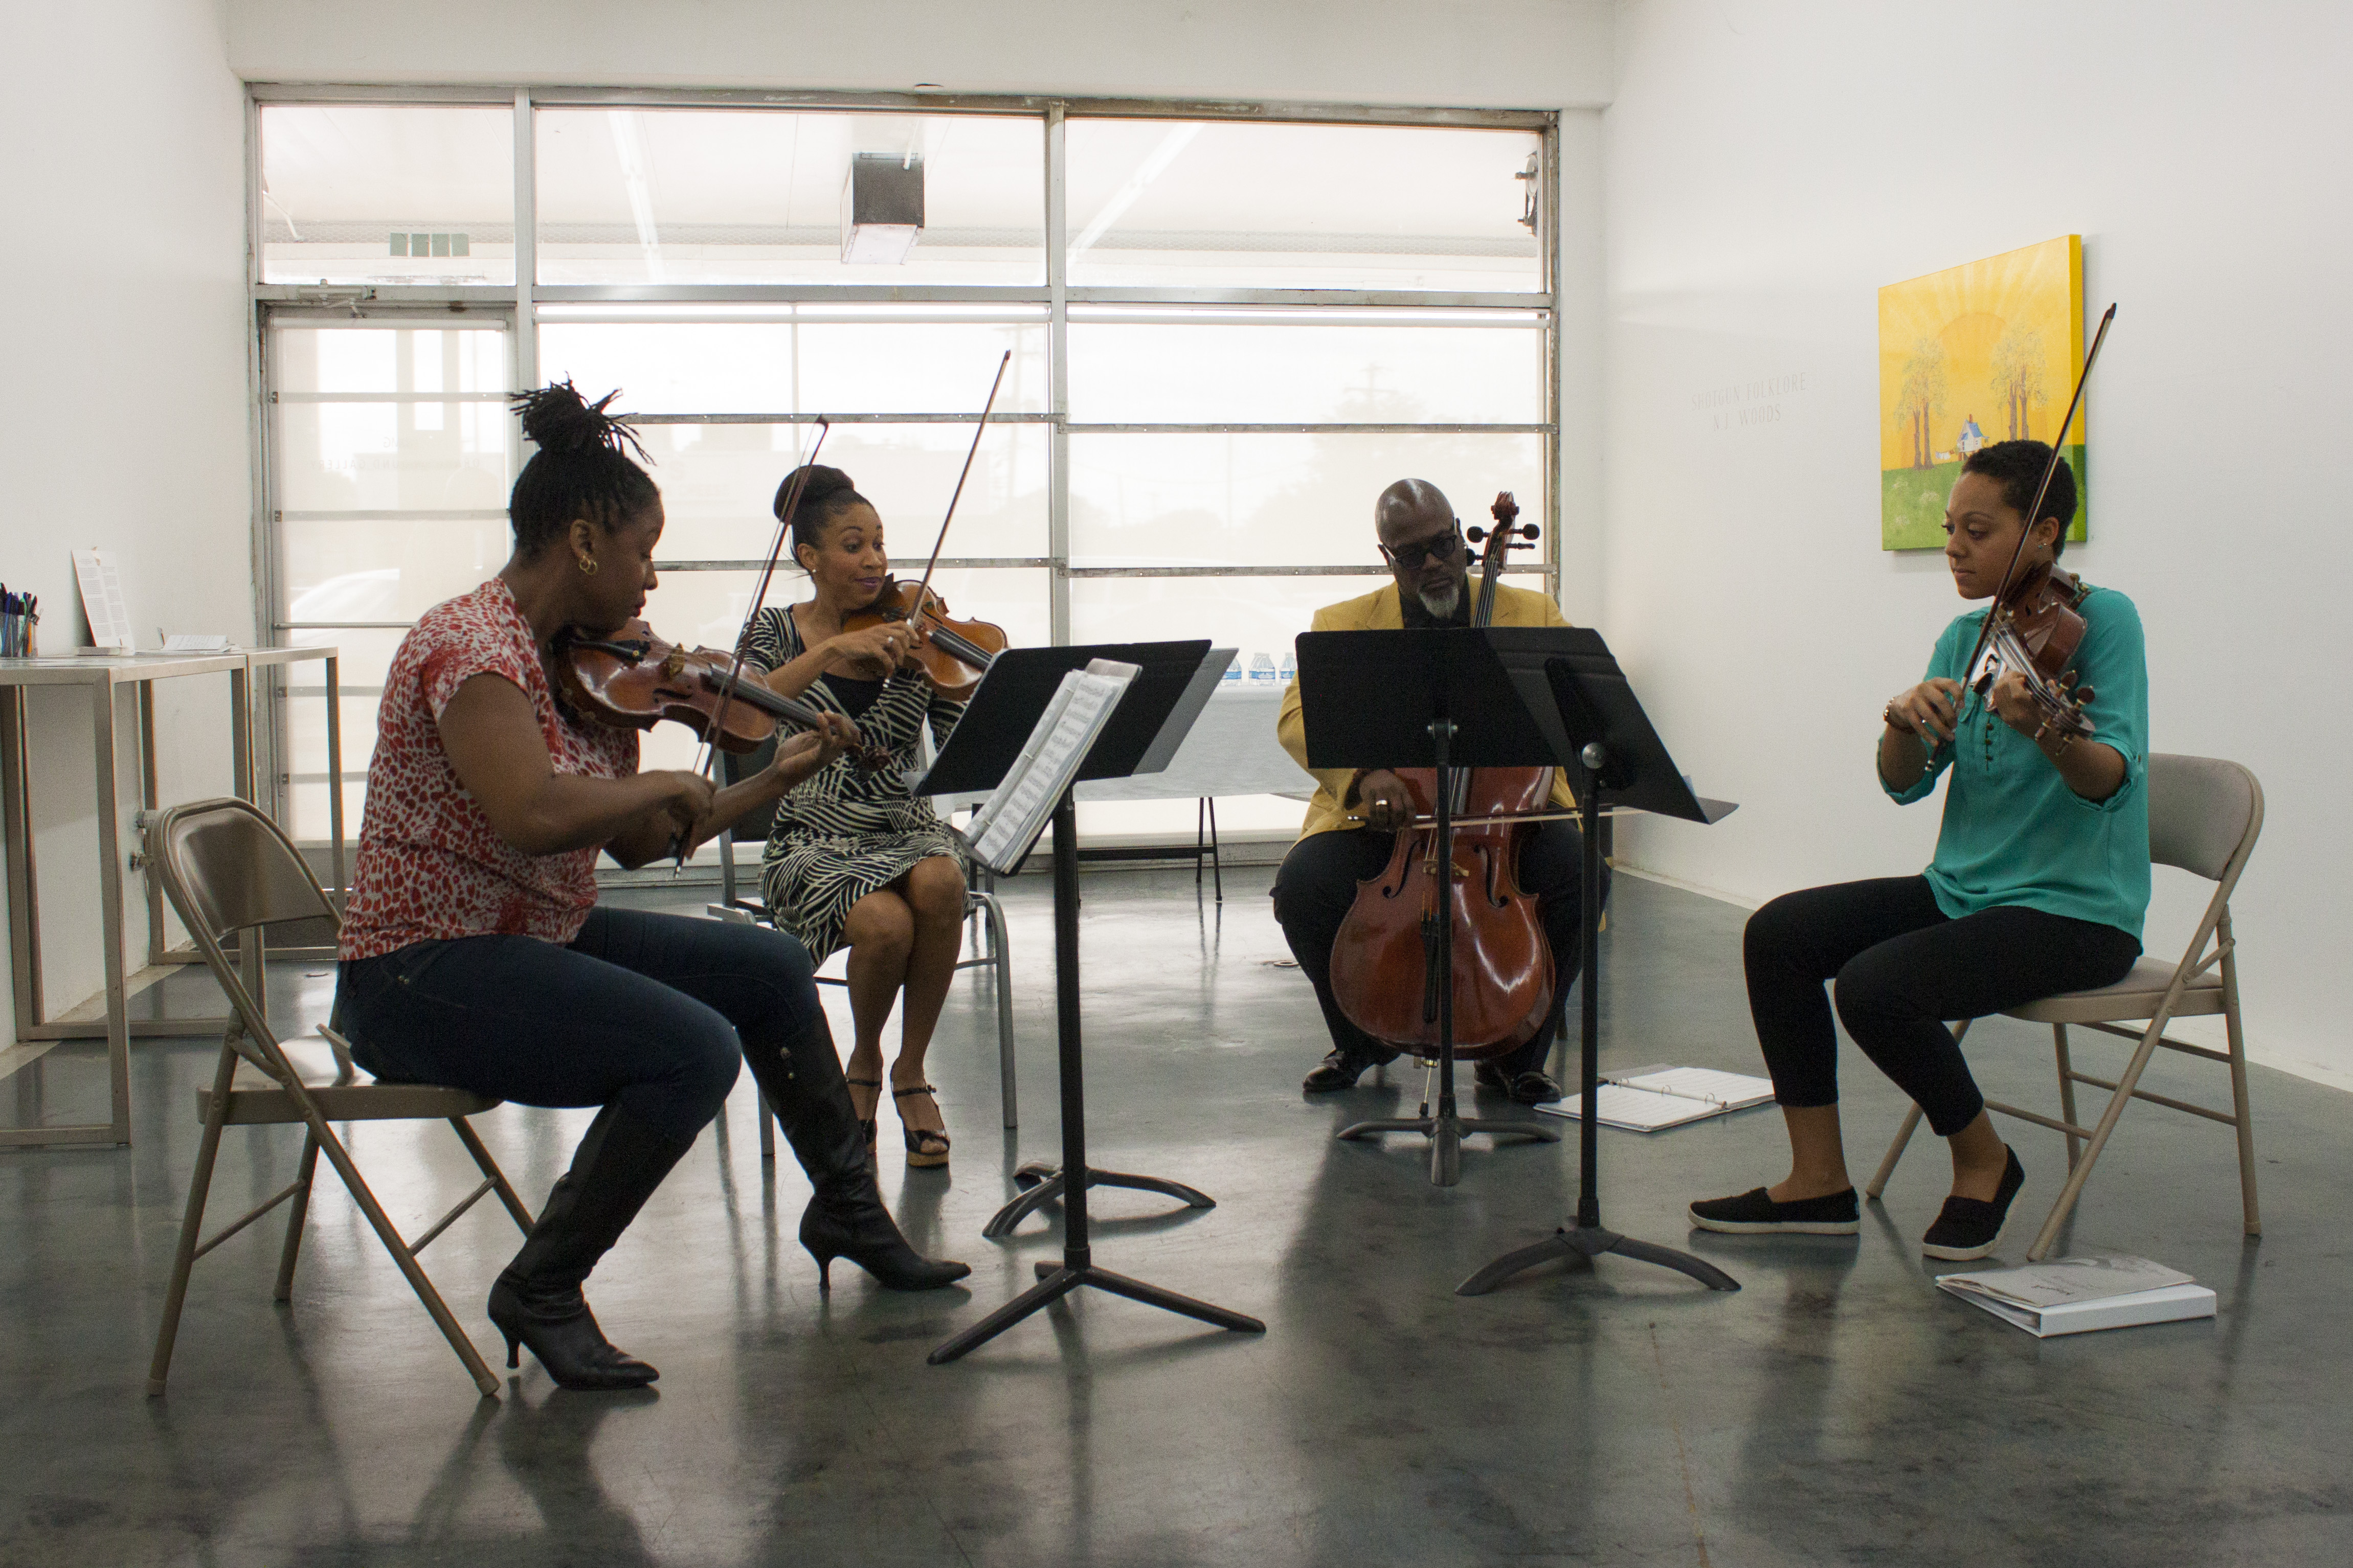 Members of the PRIZM Chamber Orchestra play as a string quartet during a meet and greet at Orange Mound Gallery on November 3. (From left to right: Chala Yancy, violin; Tami Hughes, violin; Derek Menchan, cello; and Dana Kelley, viola.